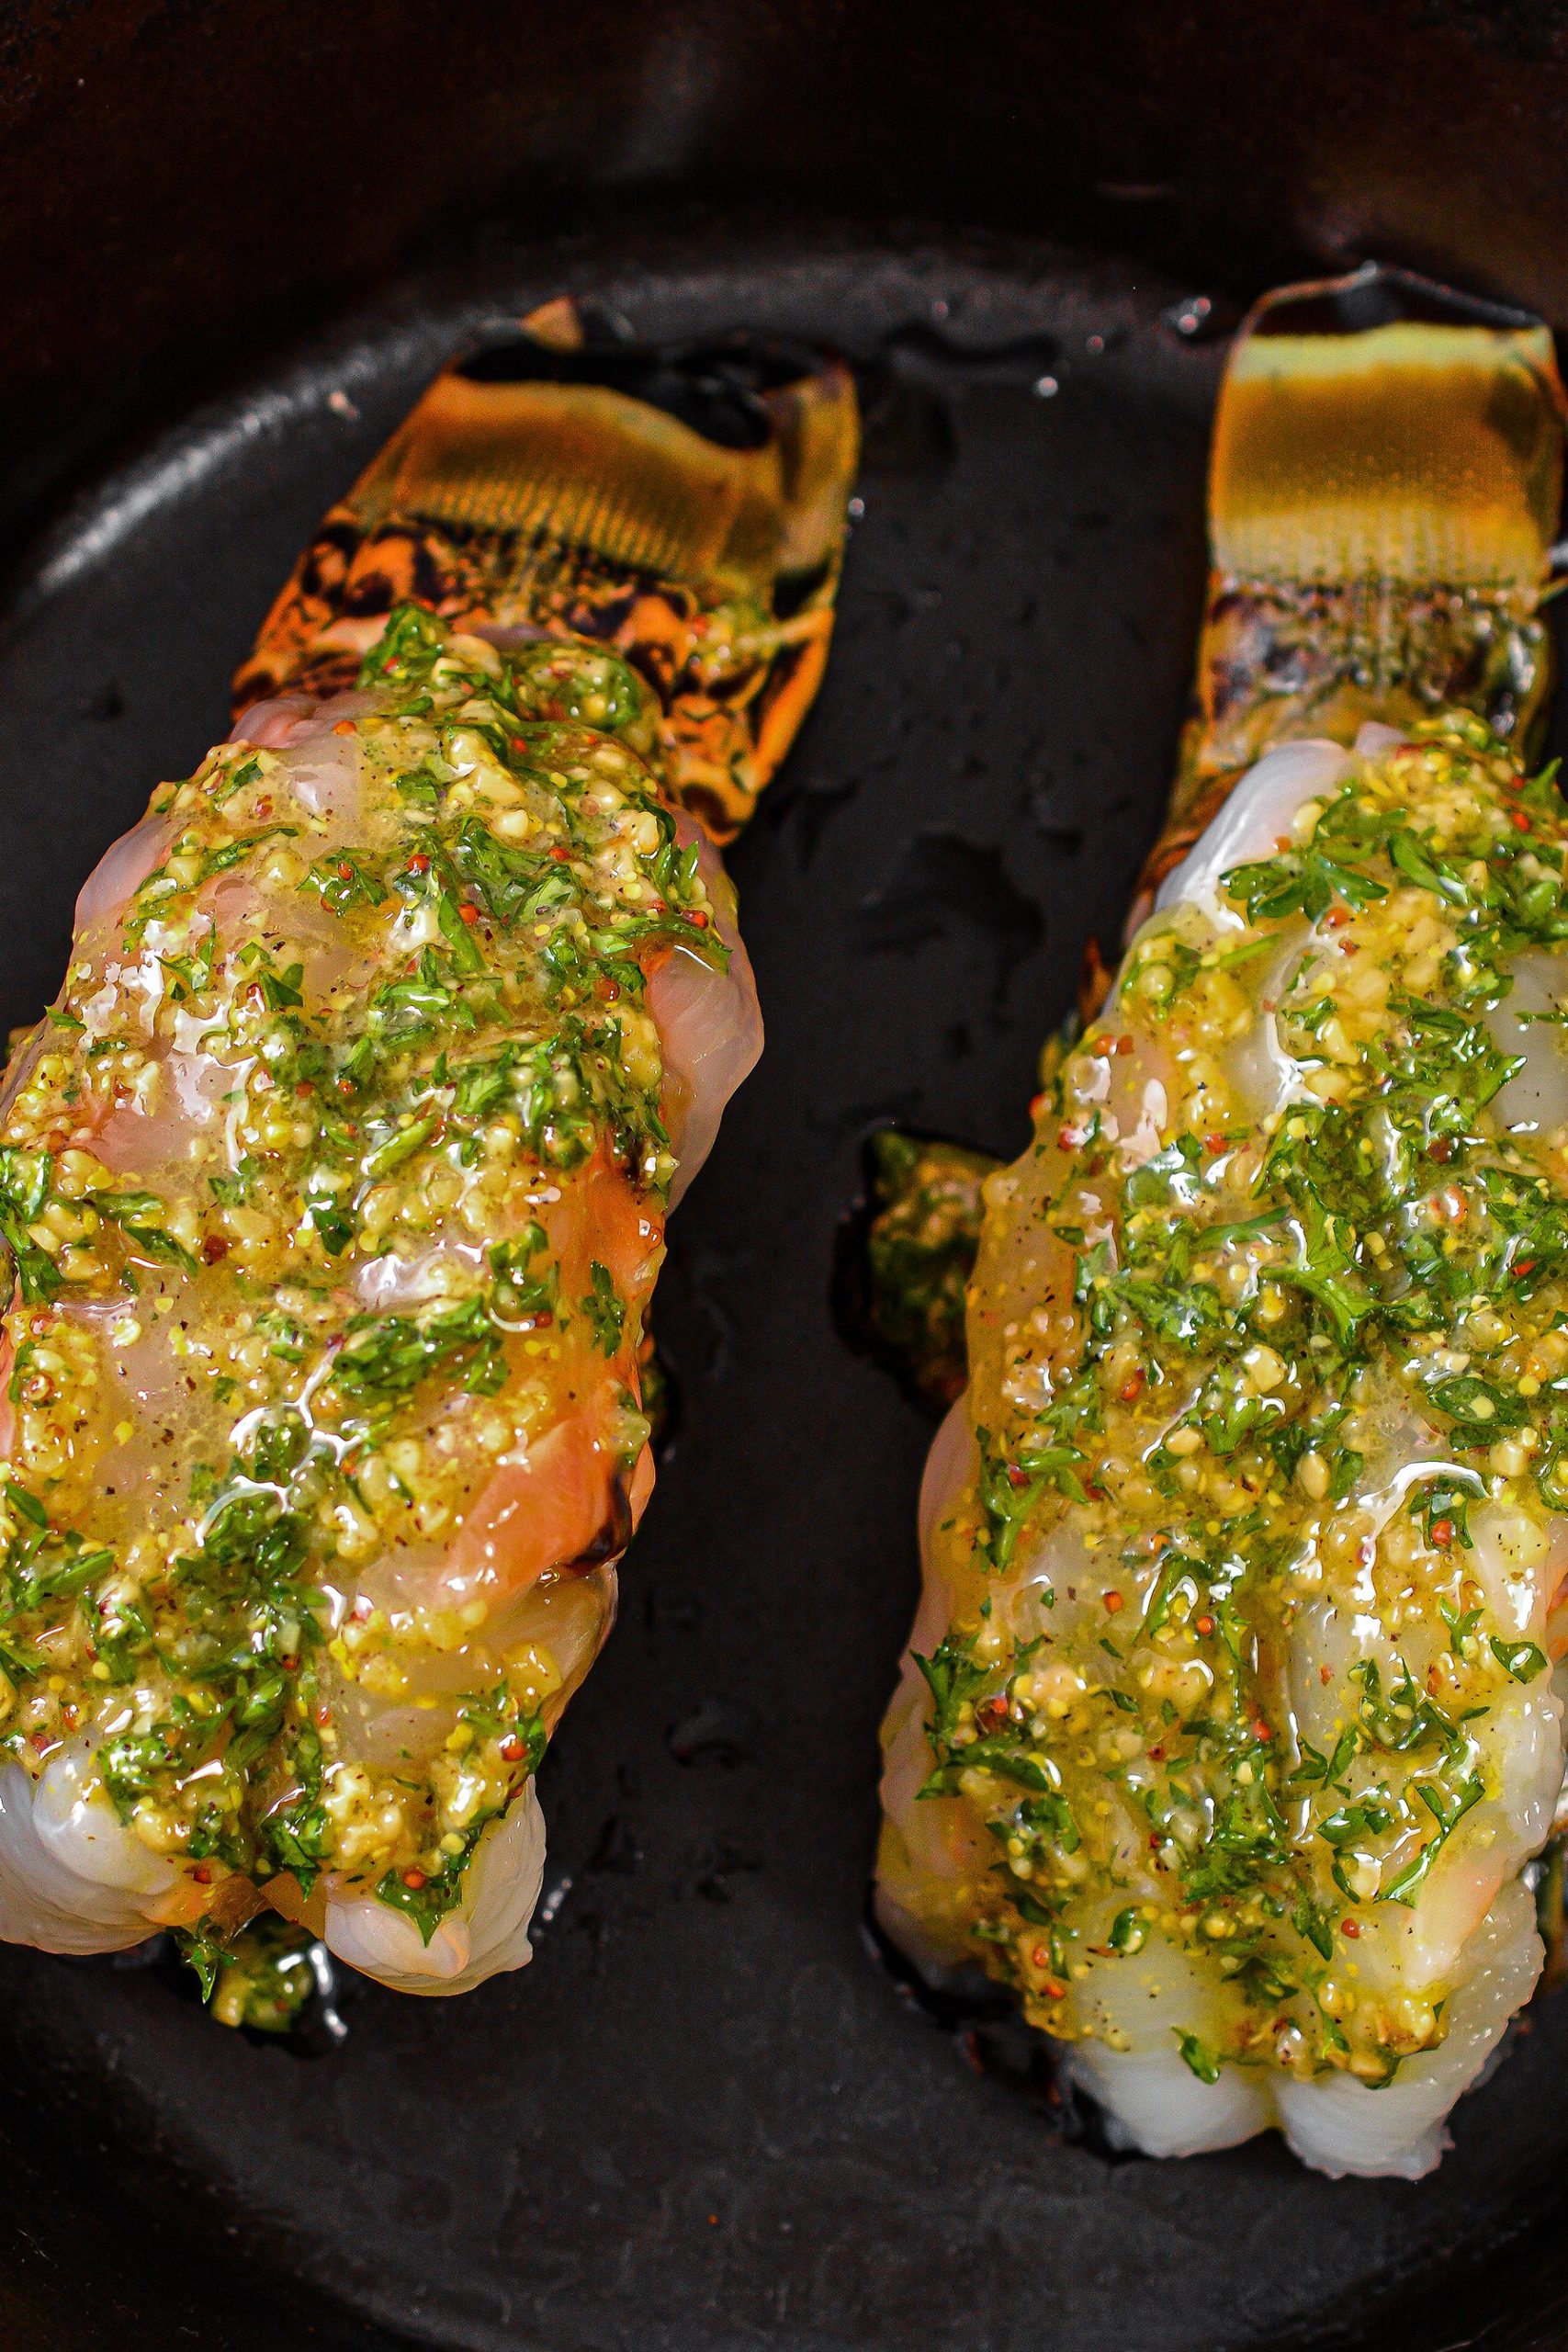 Spread the marinade over the top of each lobster tail.